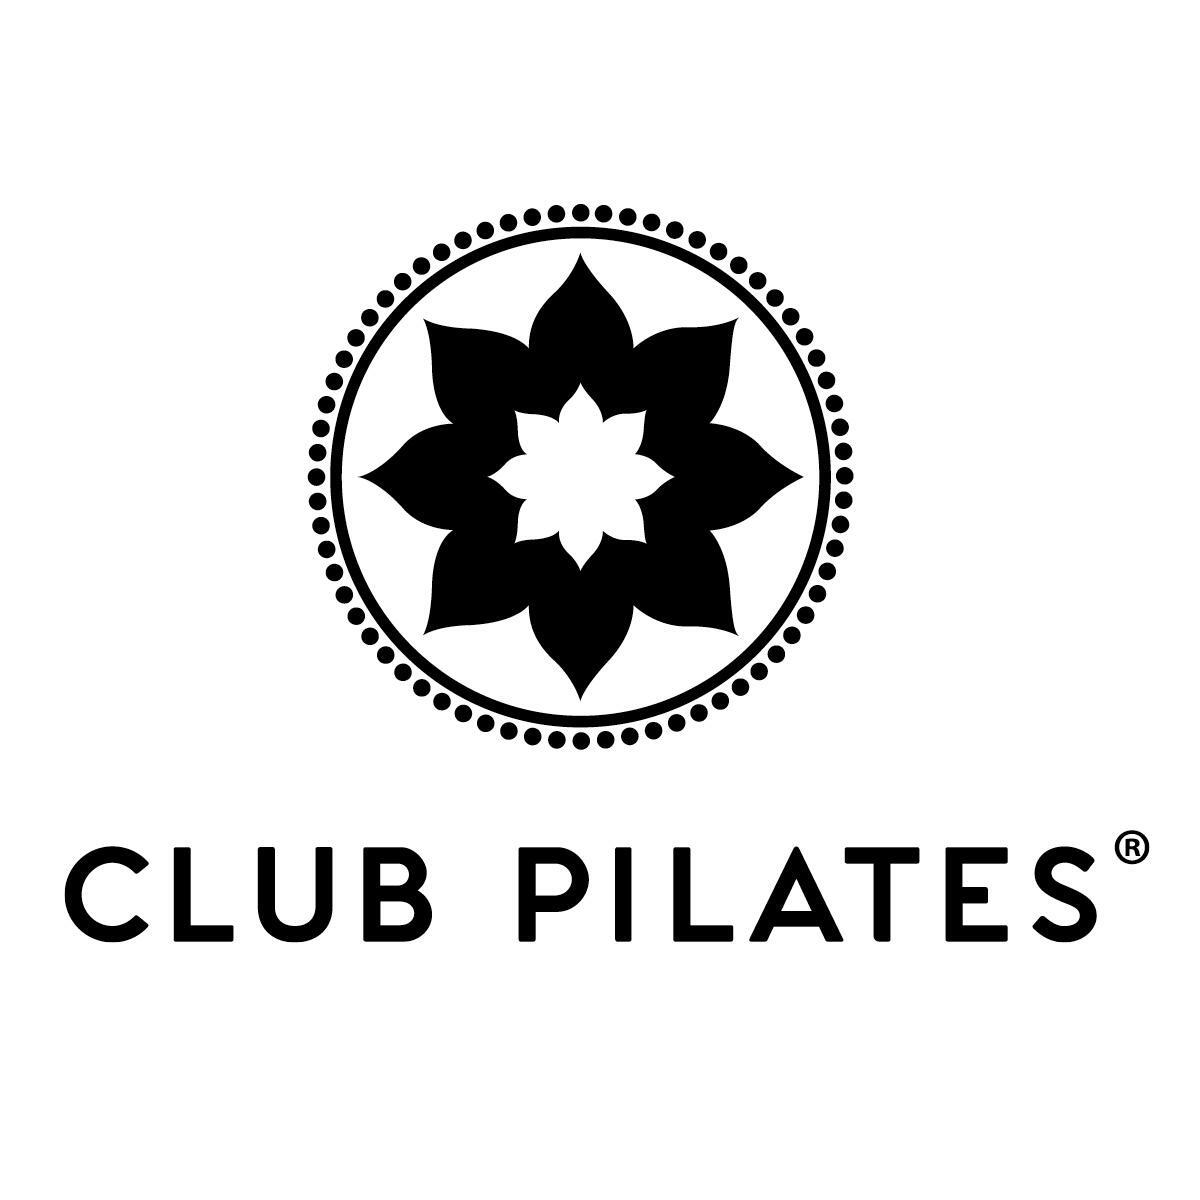 Club Pilates (South Lake Union), 413 Fairview Ave N., Seattle, WA - MapQuest